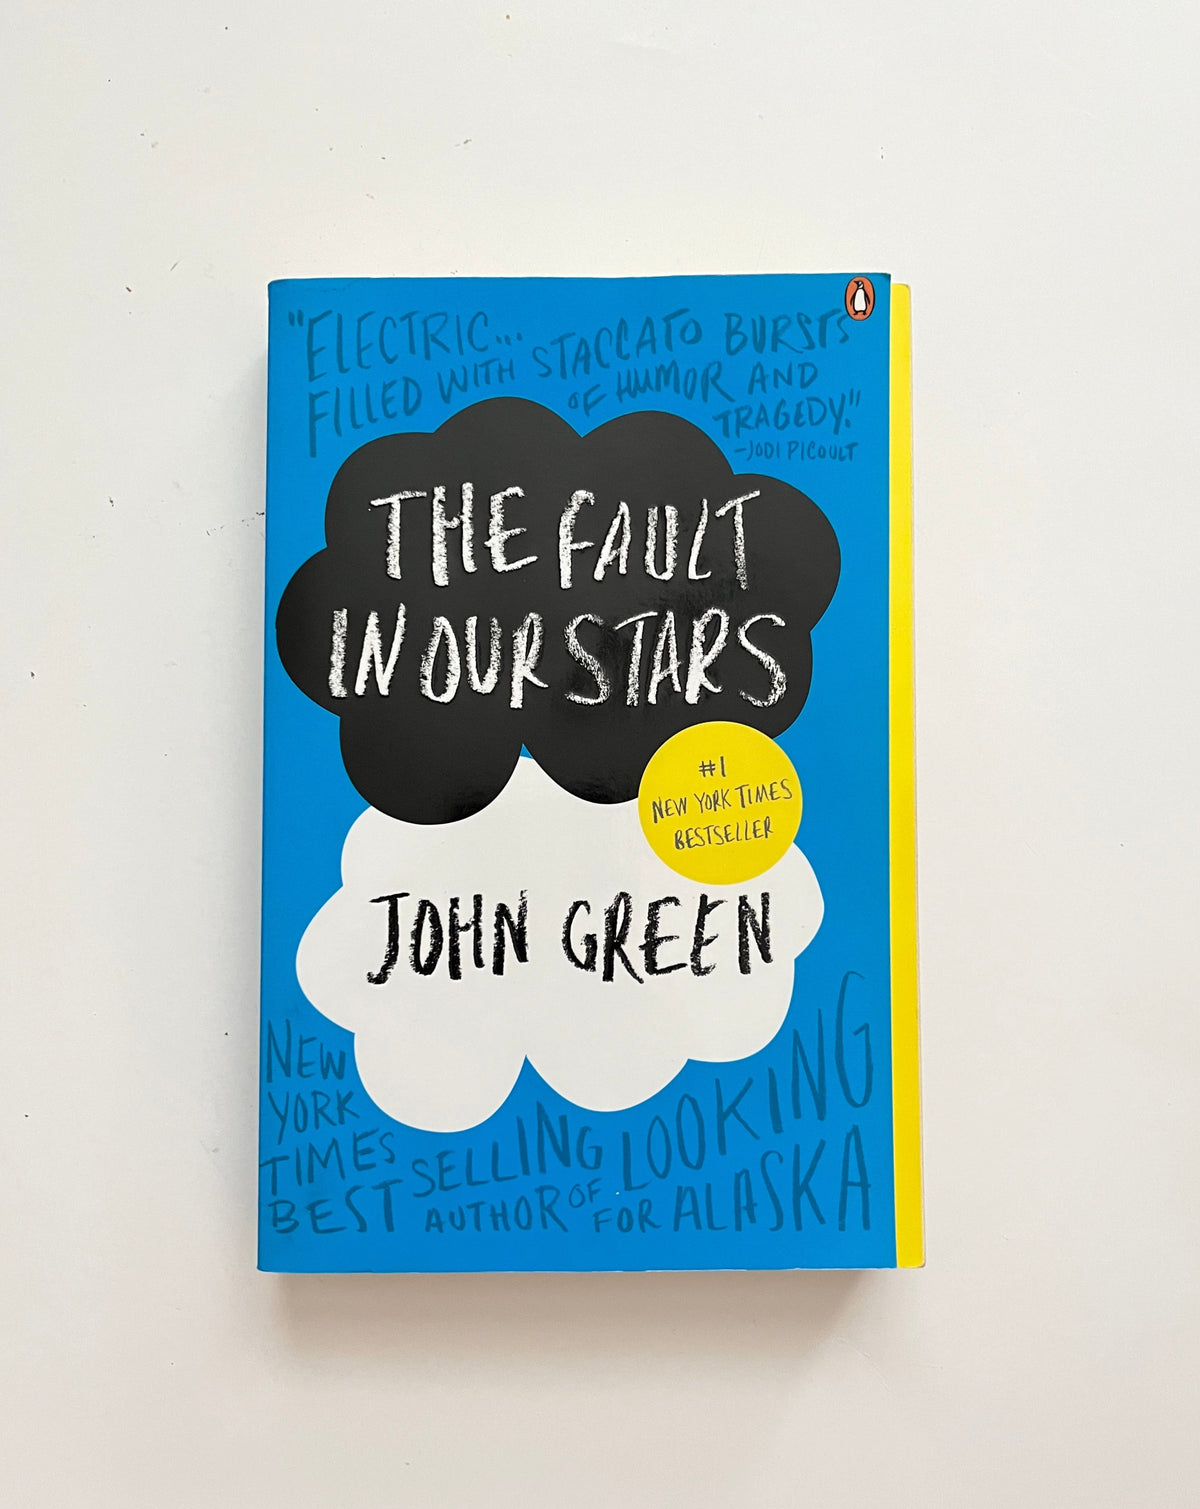 DONATE: The Fault in Our Stars by John Green